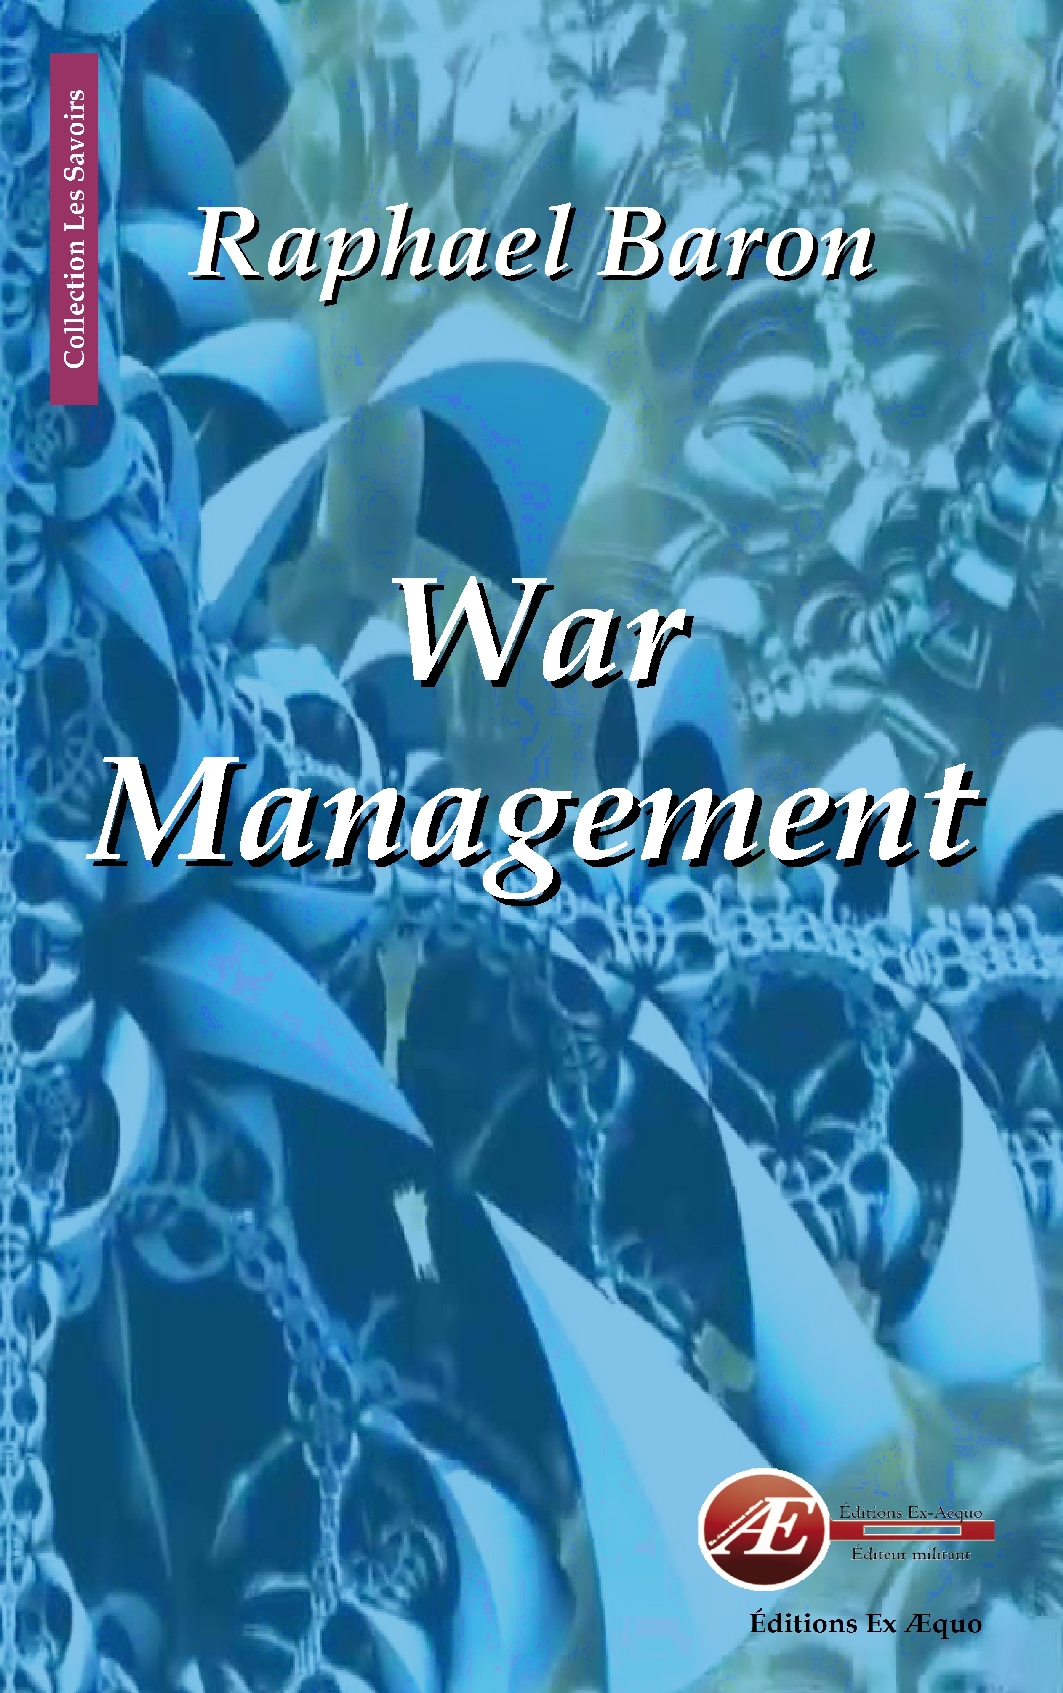 You are currently viewing War Management, de Raphael Baron